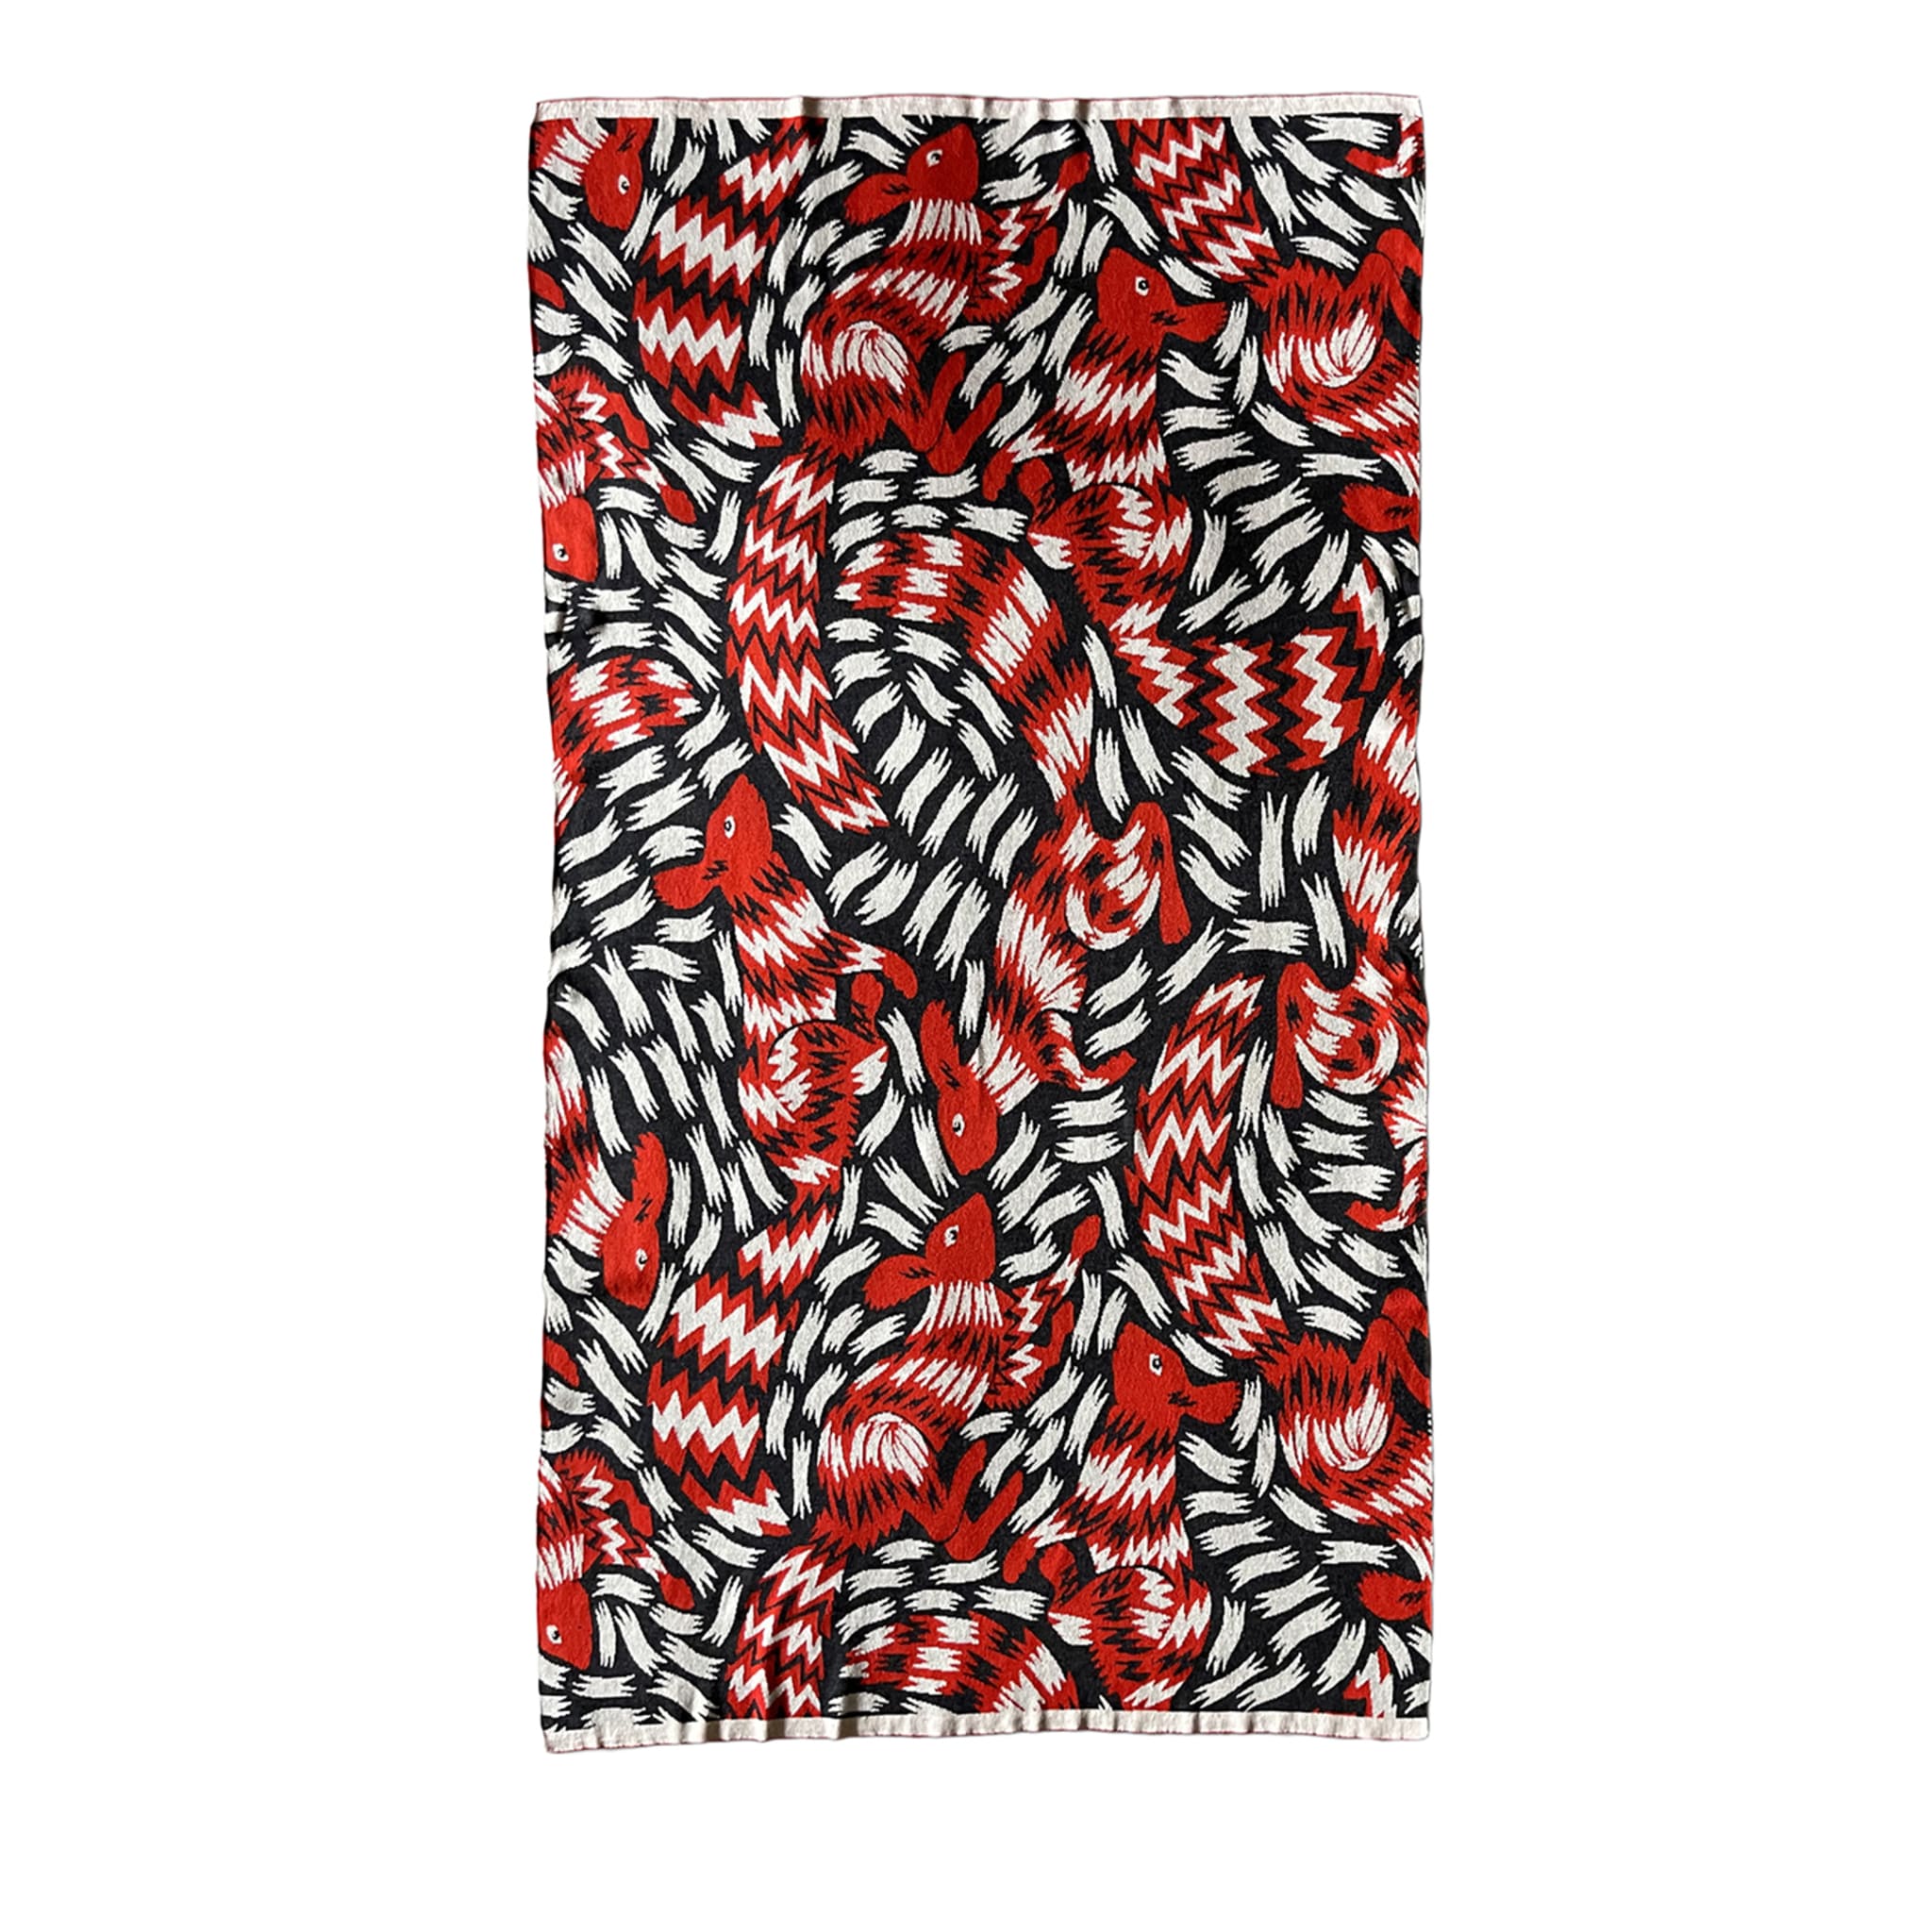 Zing Polychrome Blanket by Hanna Werning - Main view